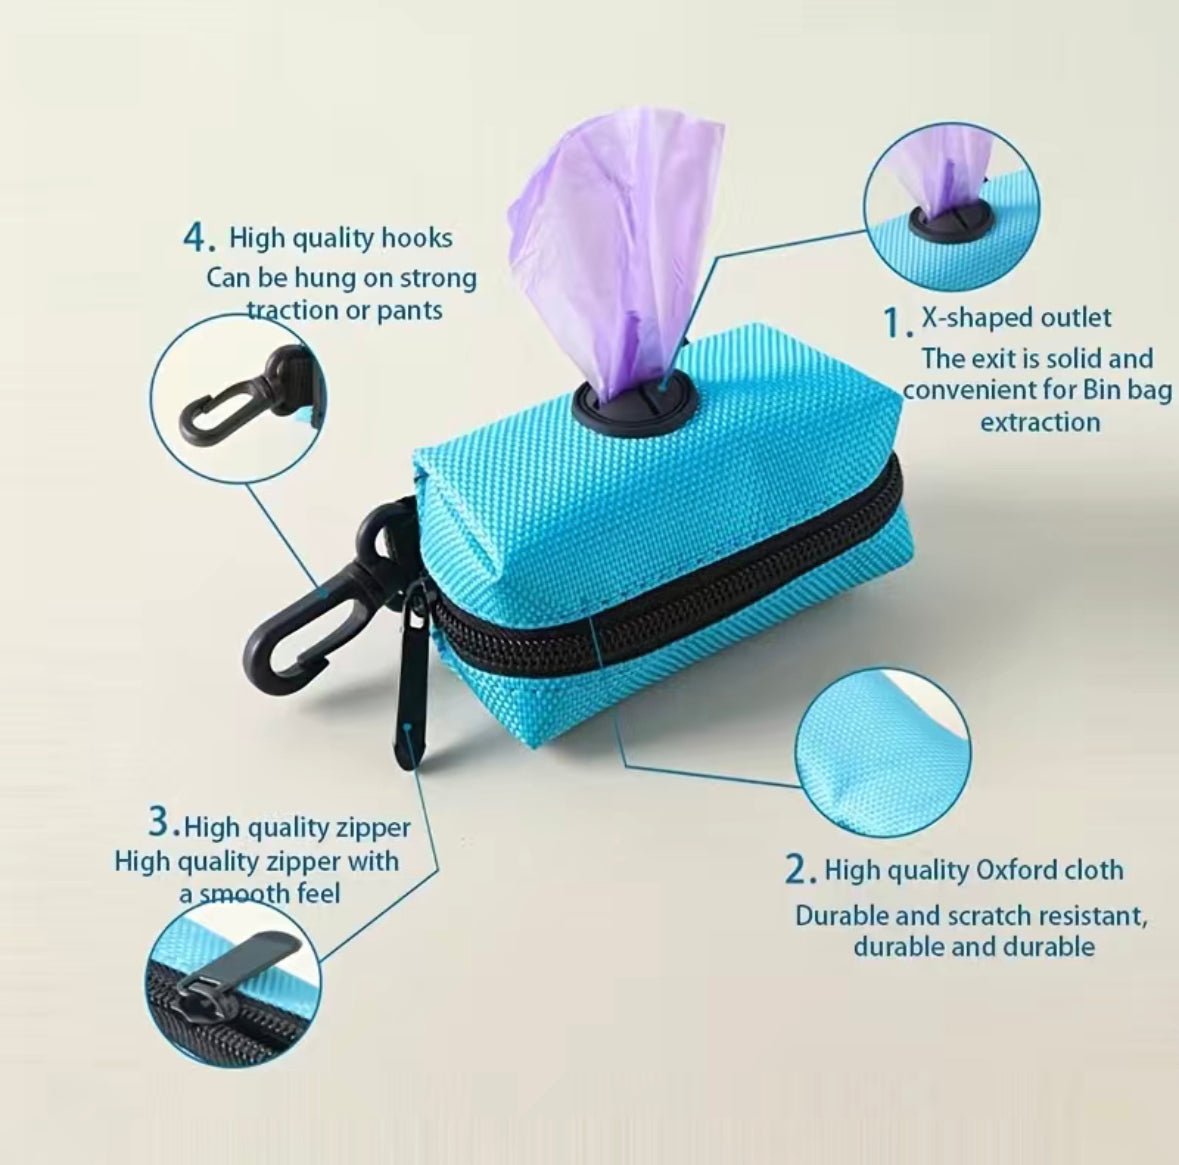 Zippered Poop Bag Holder with 5 Rolls of Bags - 4 Legs R Us